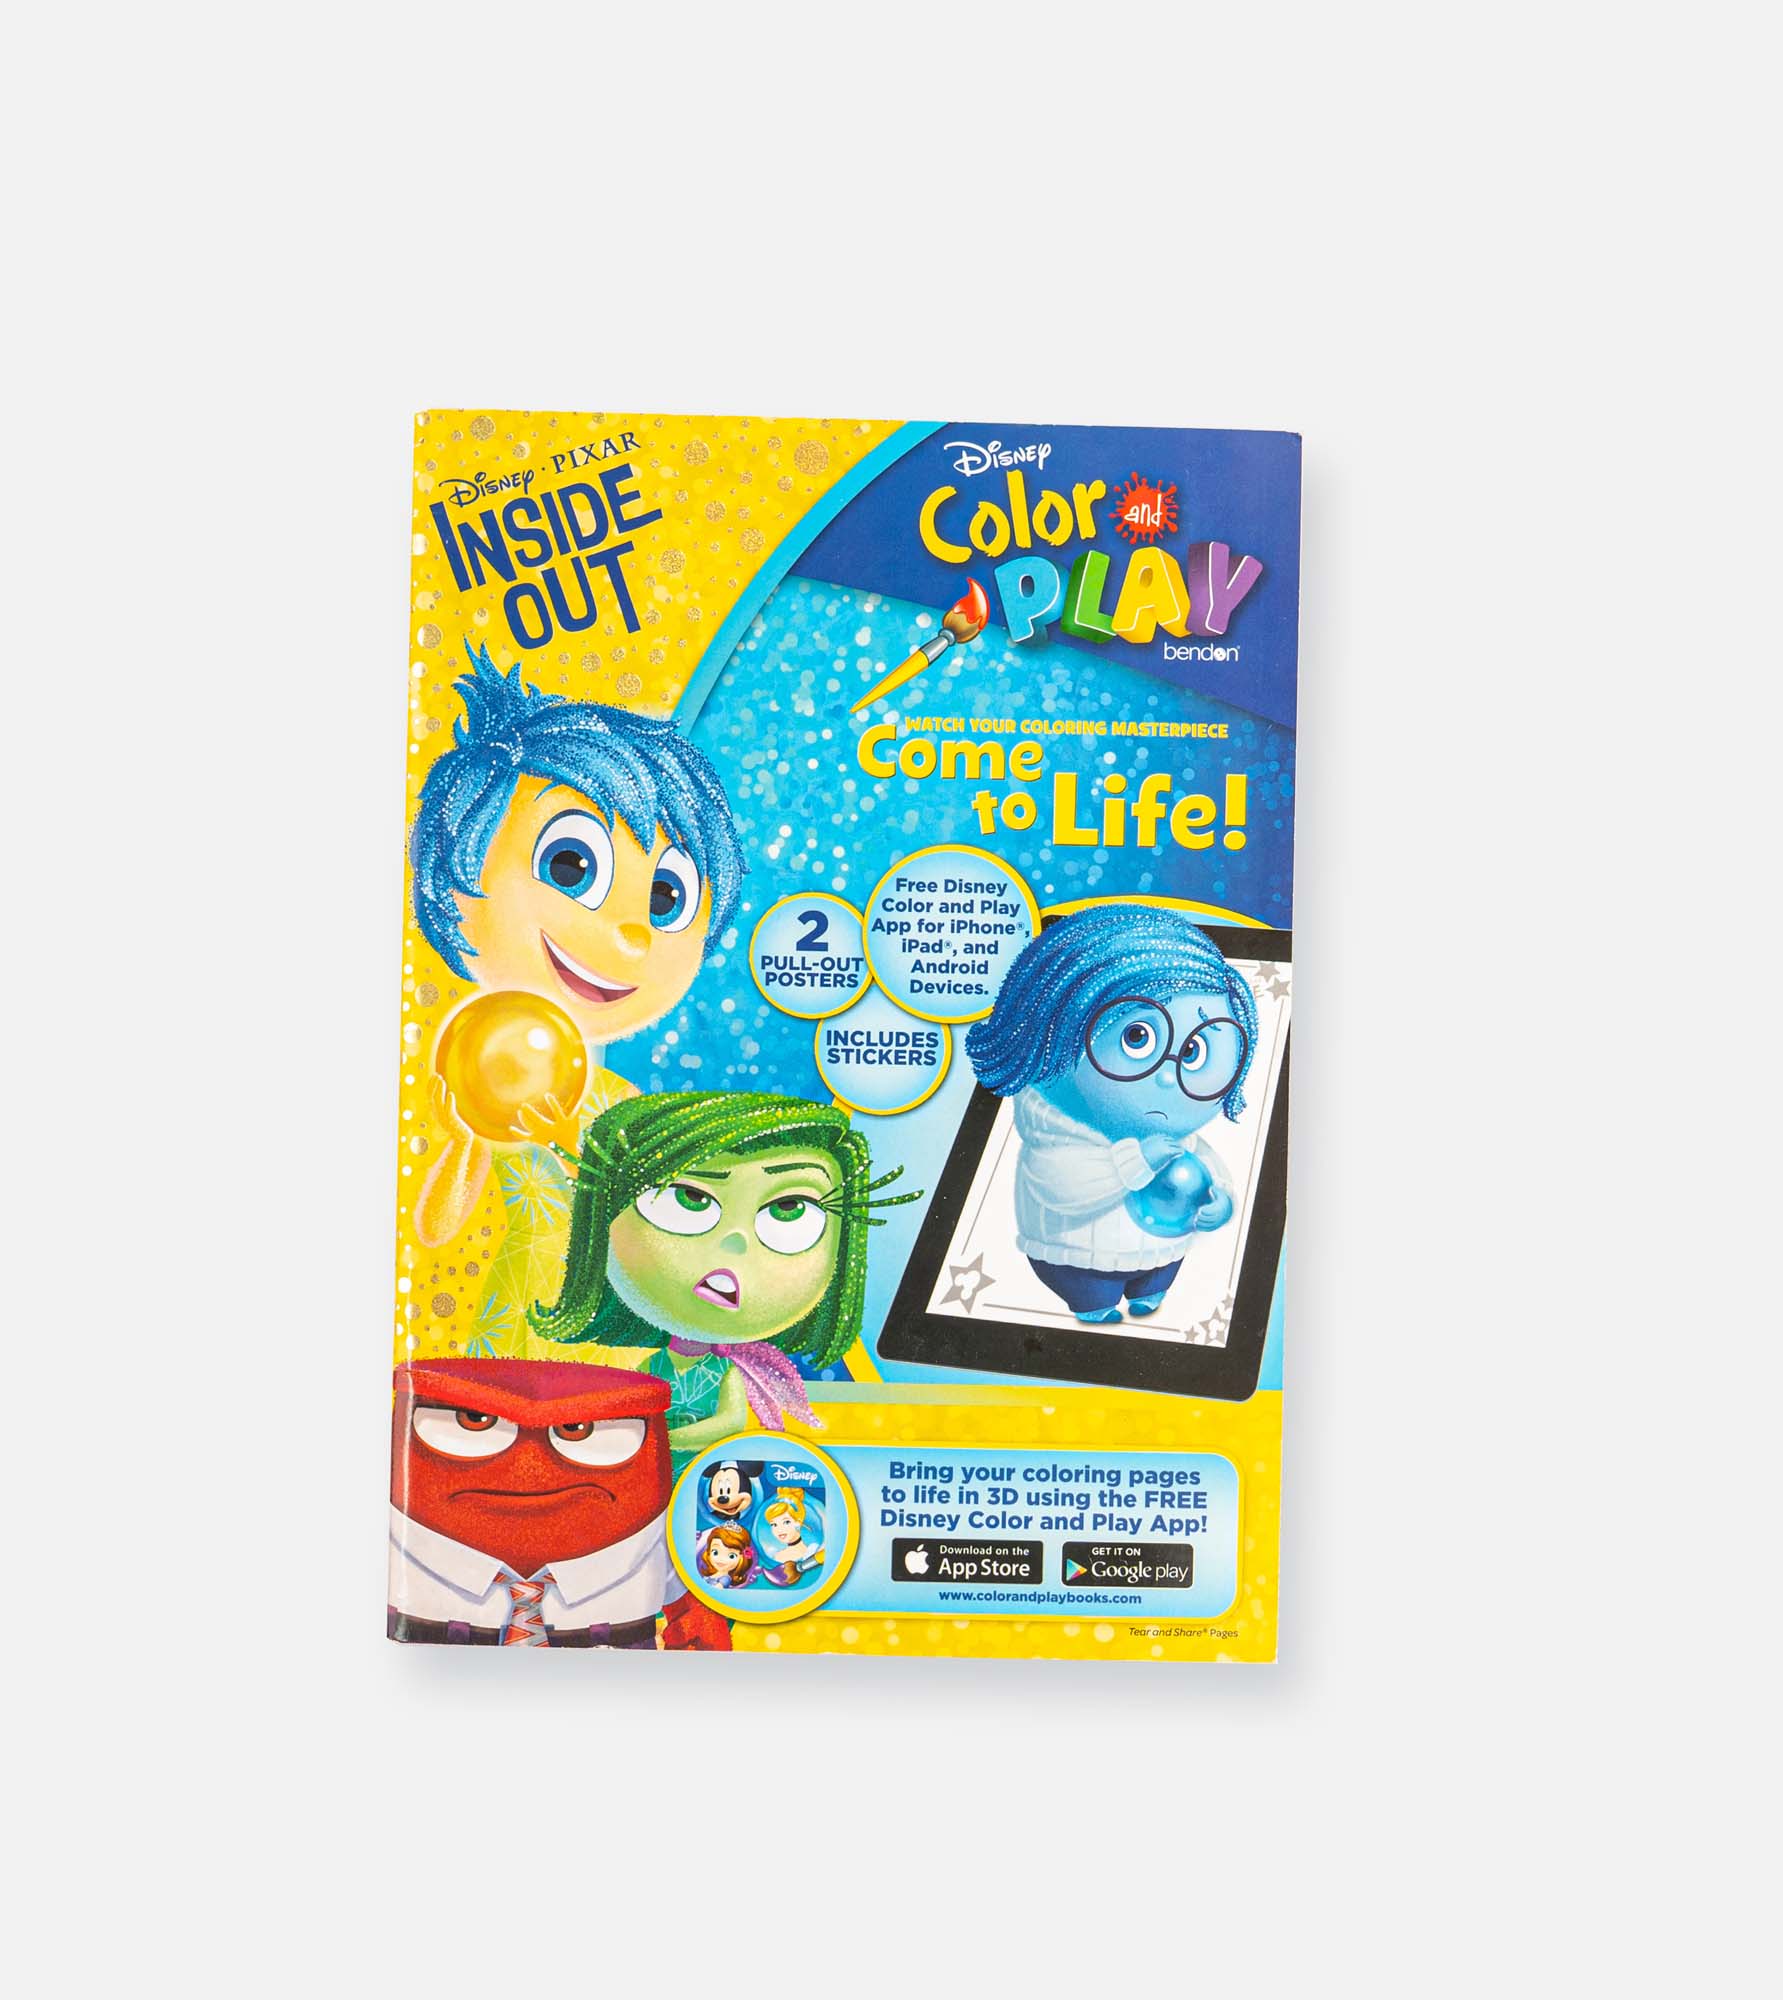 Inside out - coloring & play Book